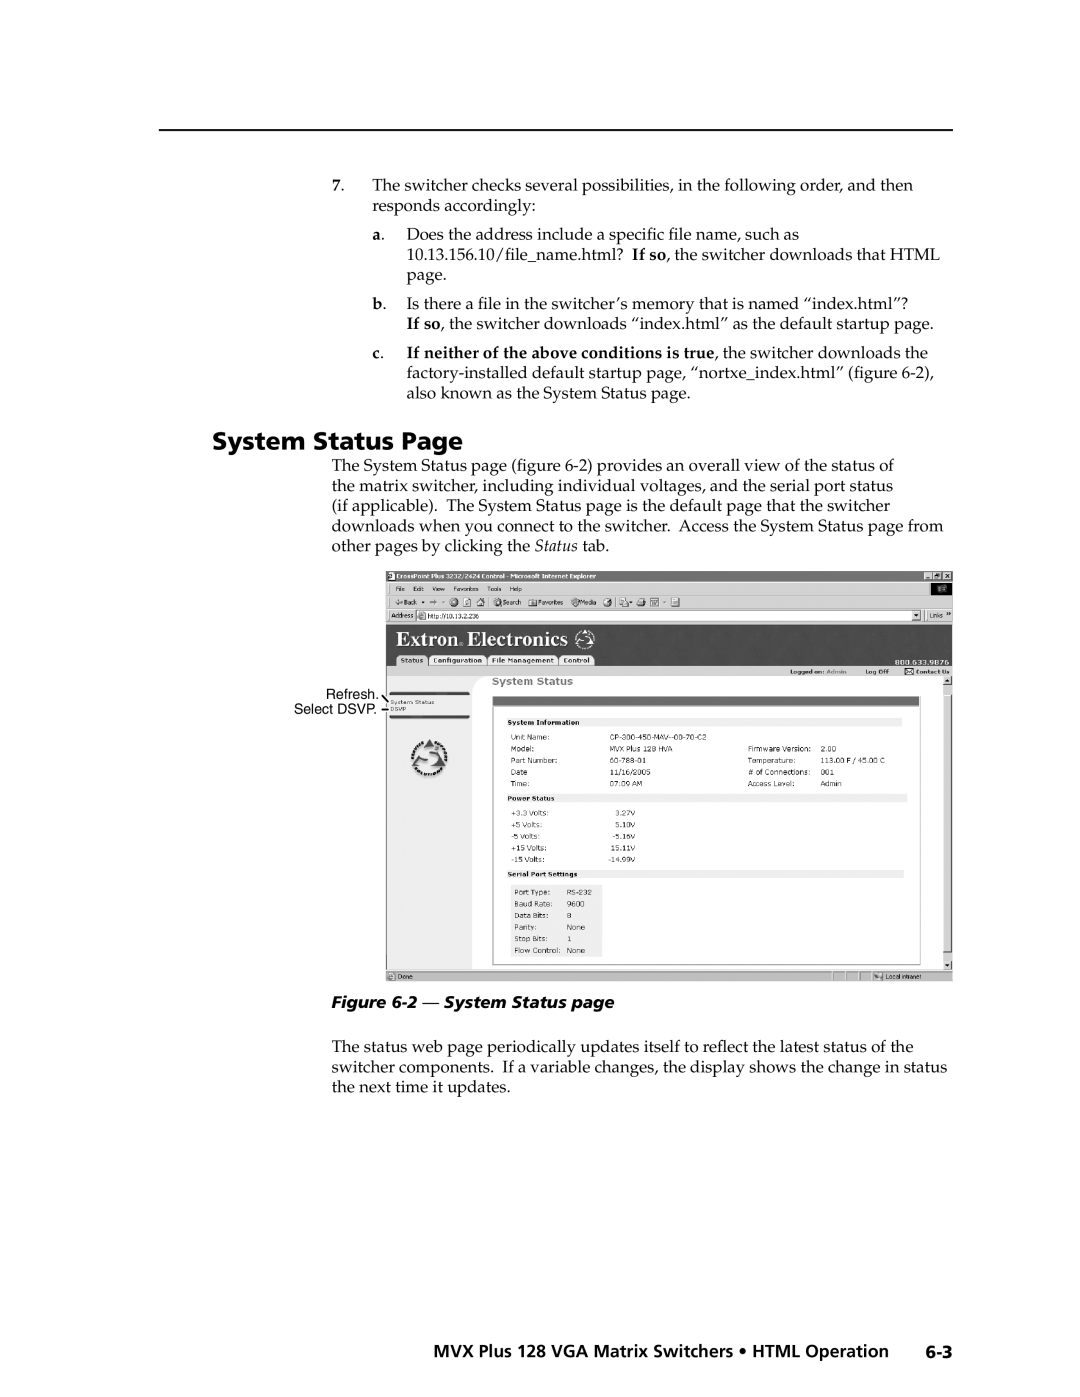 Extron electronic MVX PLUS 128 manual System Status Page, 2 - System Status page 